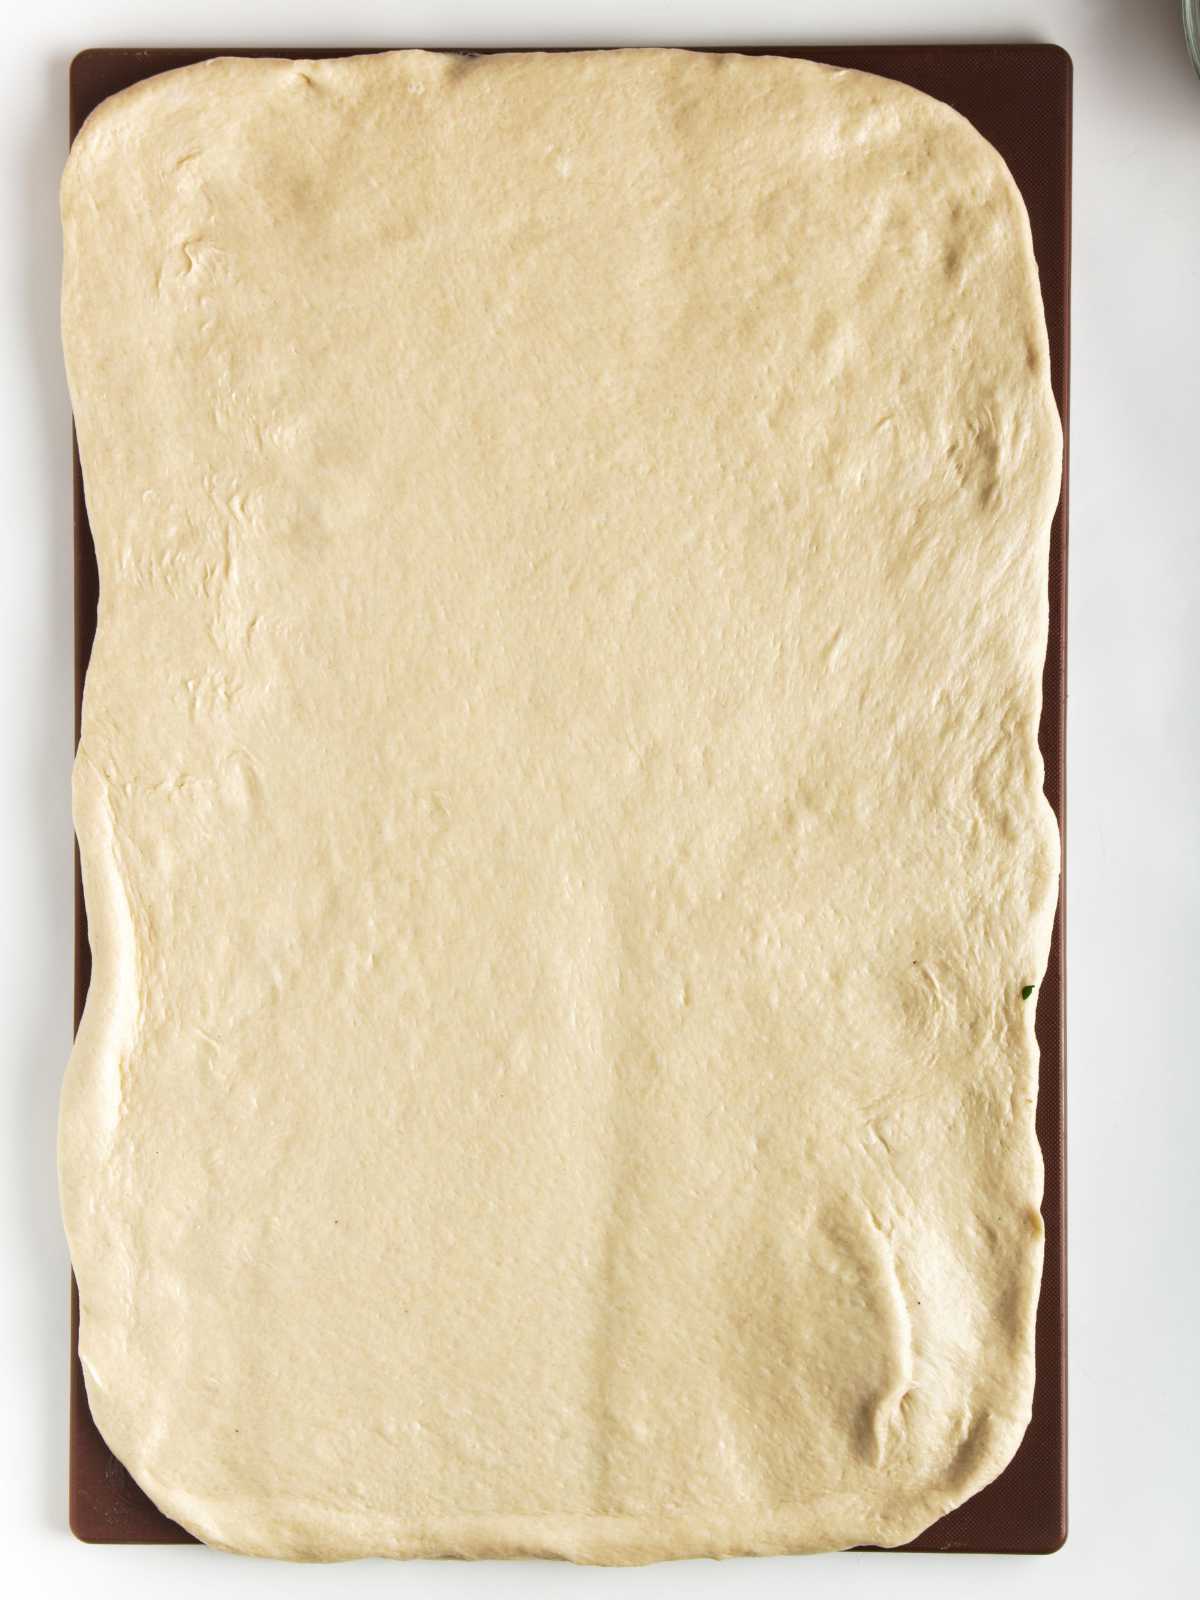 dough rolled out into a large rectangle.